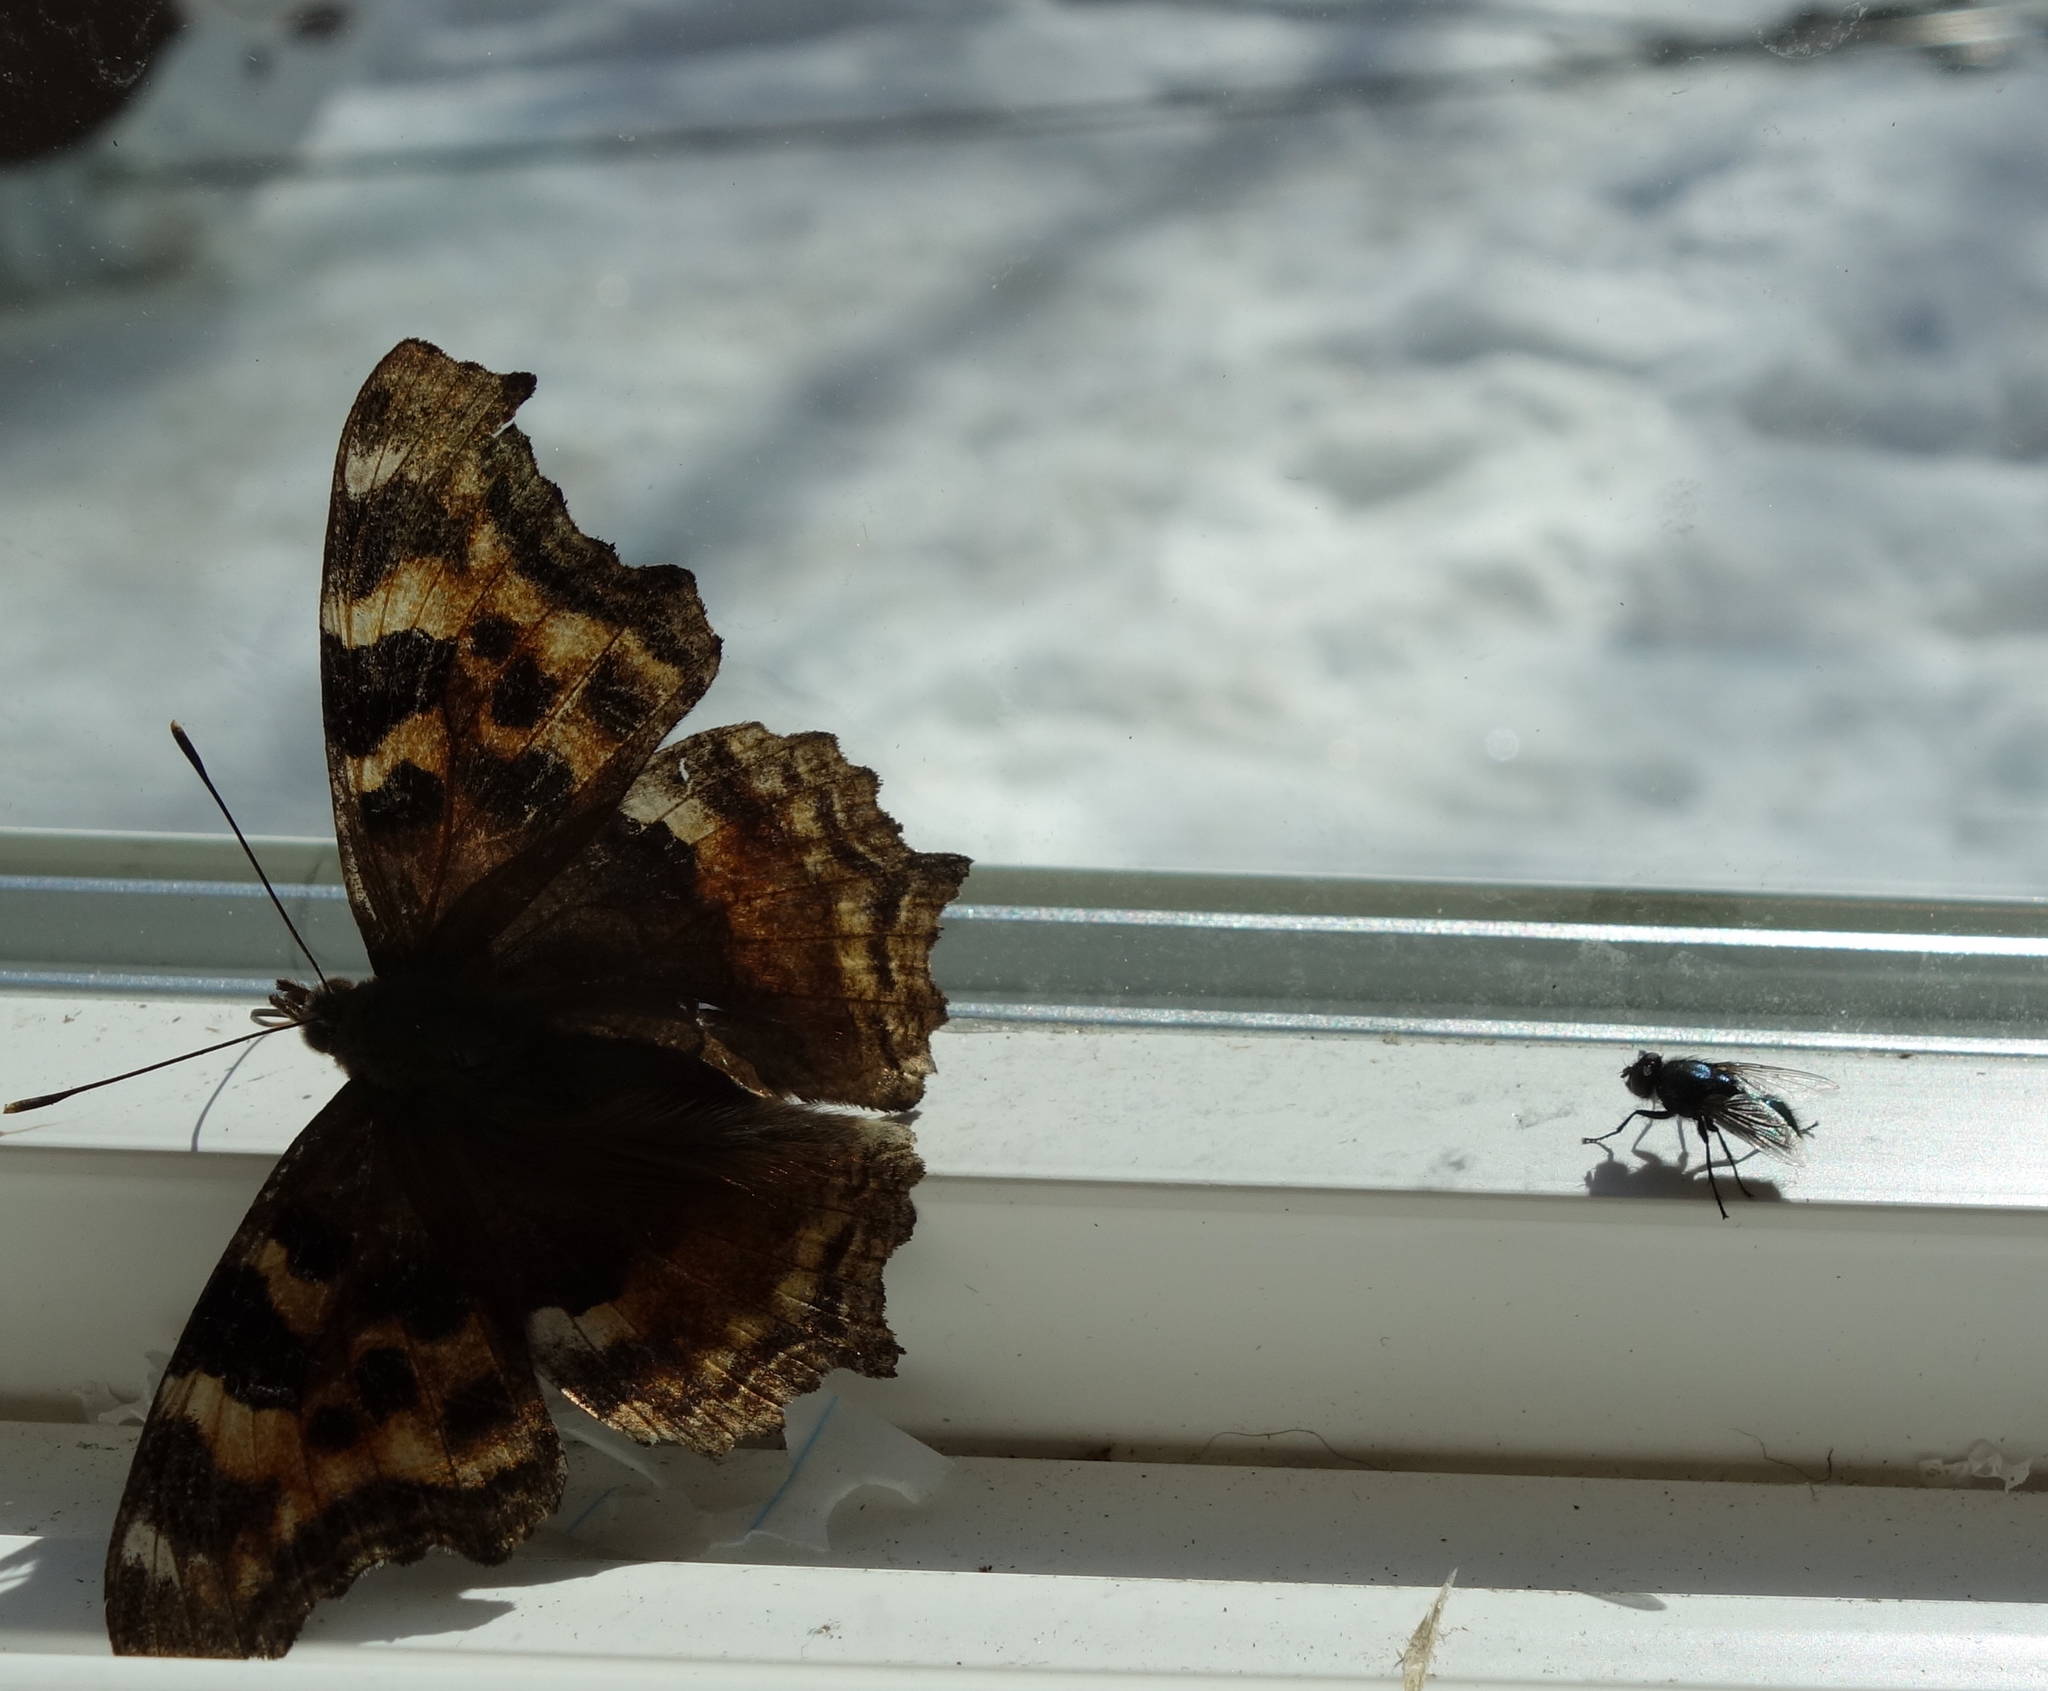 Courtesy Photo / Ned Rozell 
A Compton tortoiseshell butterfly and a housefly just released from dormancy by warm spring air.